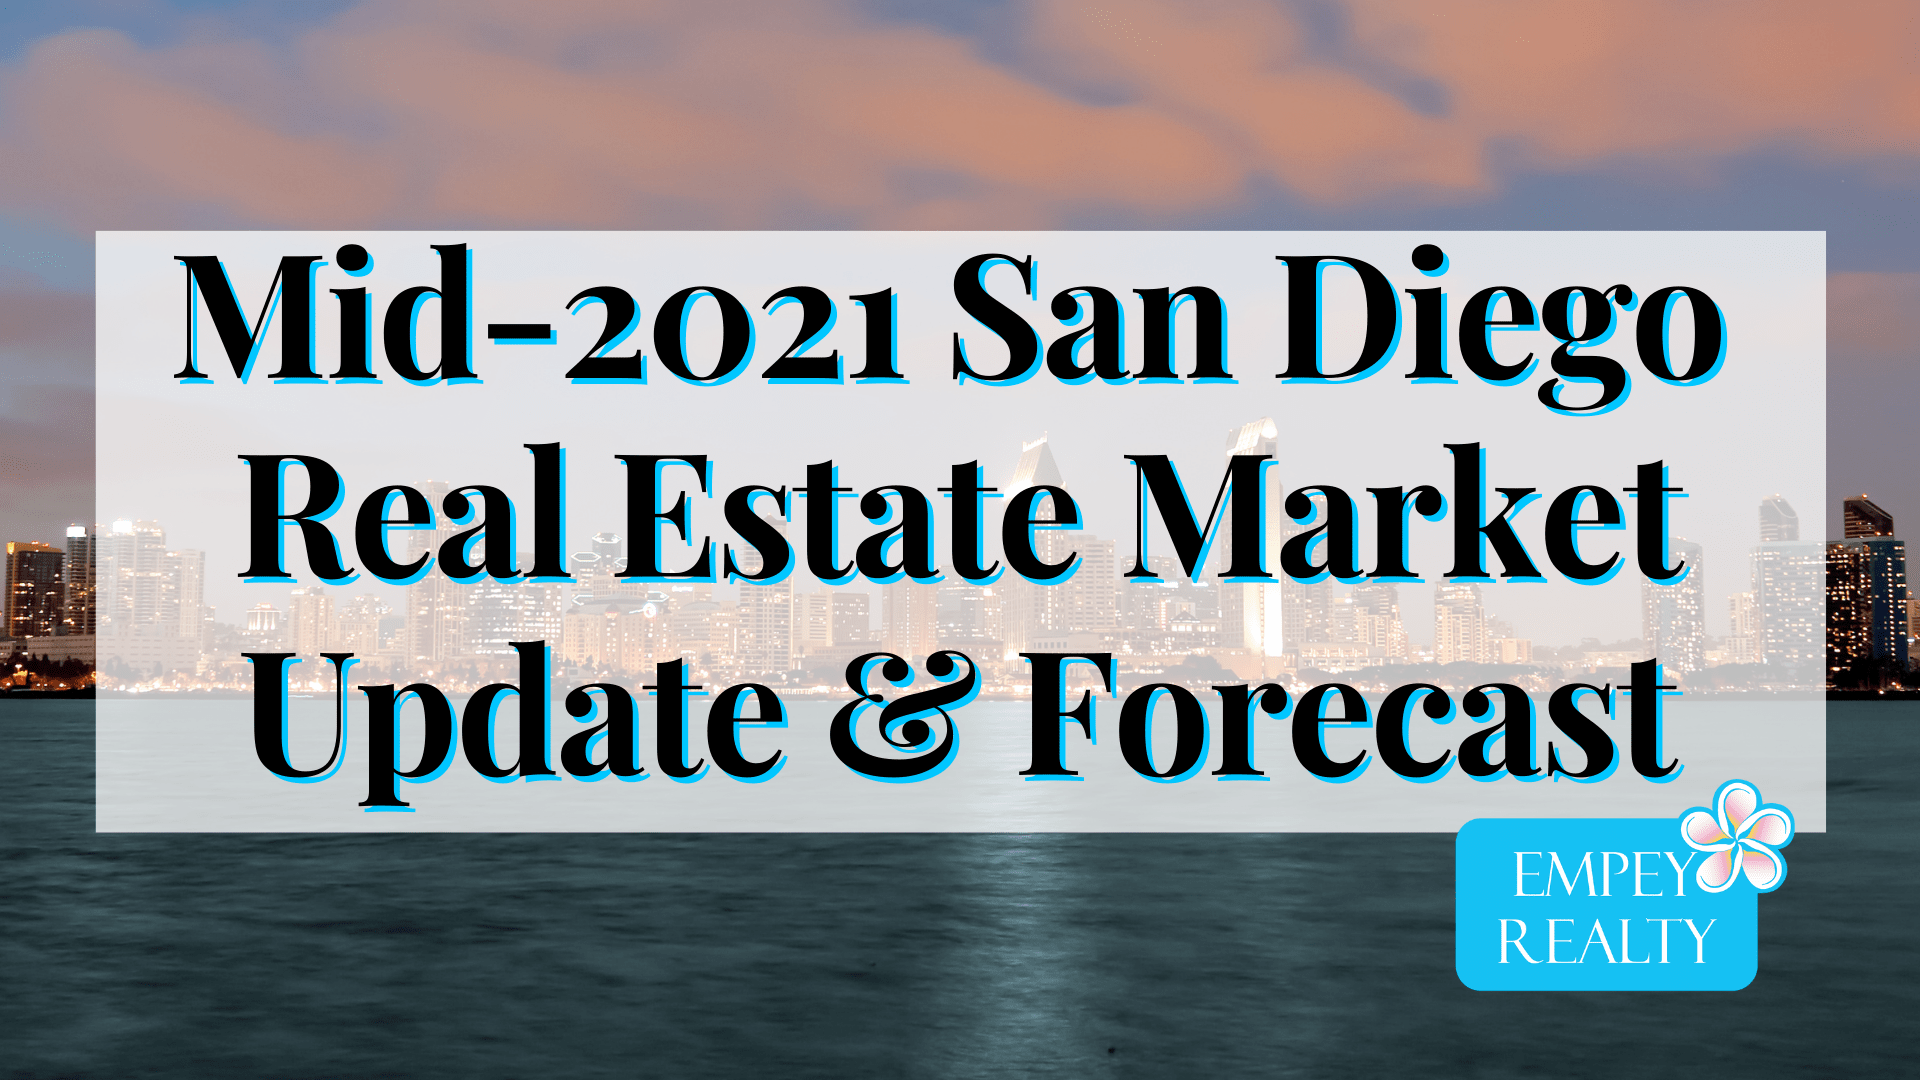 Mid-2021 San Diego Real Estate Market Update and Forecast